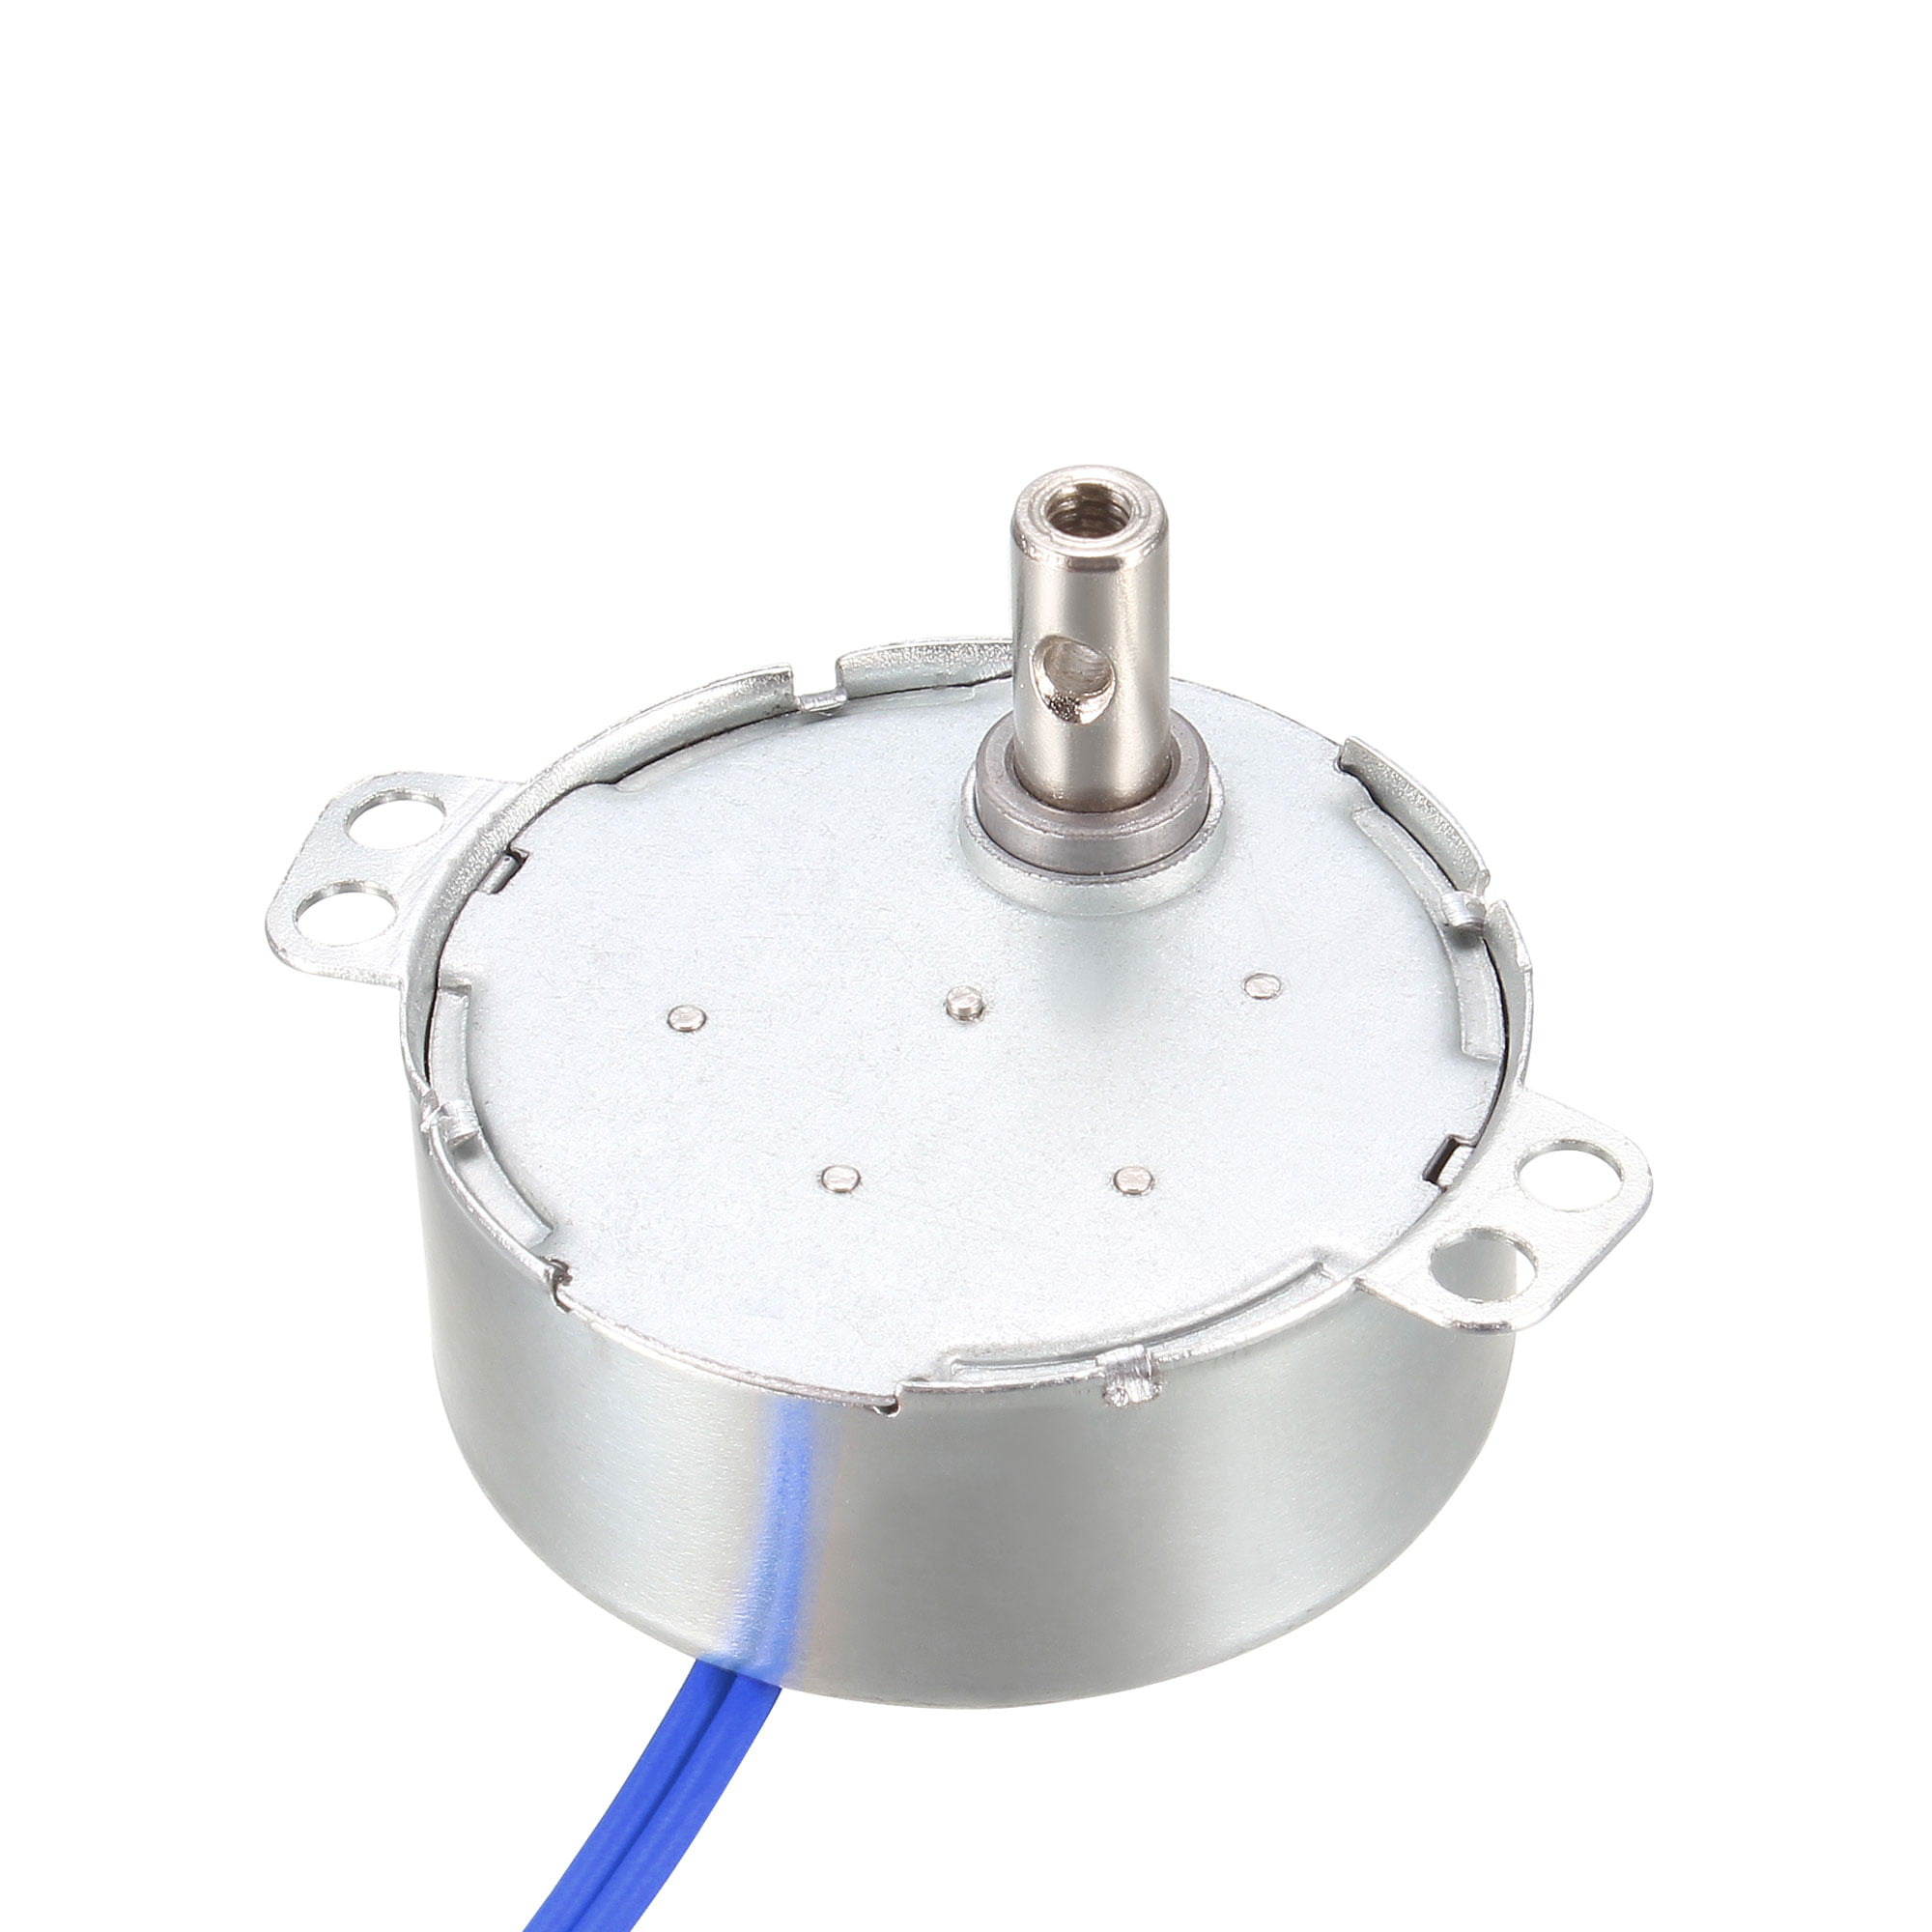 CraftBay Synchronous Synchron Motor Turntable Motor Electric Cuptisserie Motor Cup Turner Motor 100-127 VAC 50/60 Hz CCW/CW Direction for Hand-Made School Project Model 2.5-3 